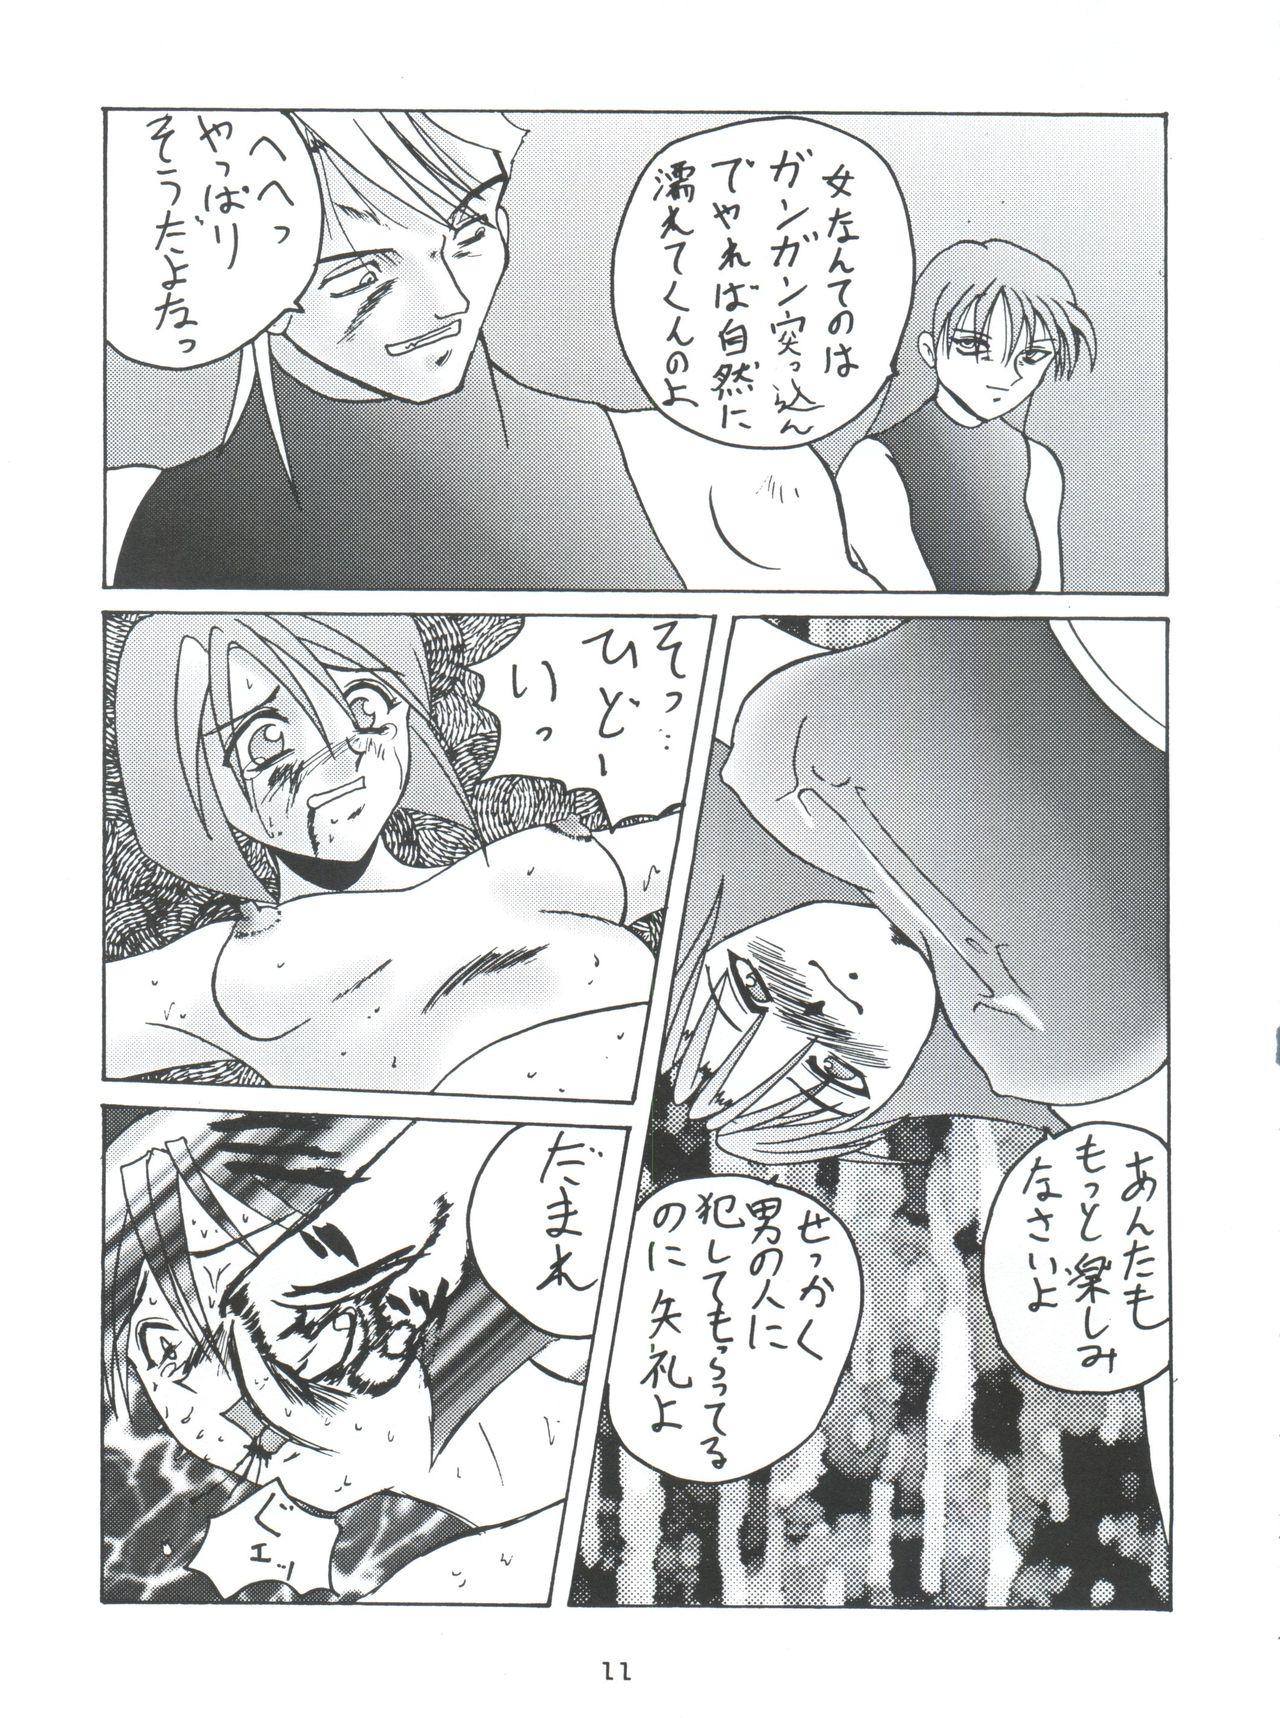 Bizarre Morokko Ai no Touhikou - Gaogaigar Saber marionette Yat space travel agency Blade of the immortal Mama - Page 10